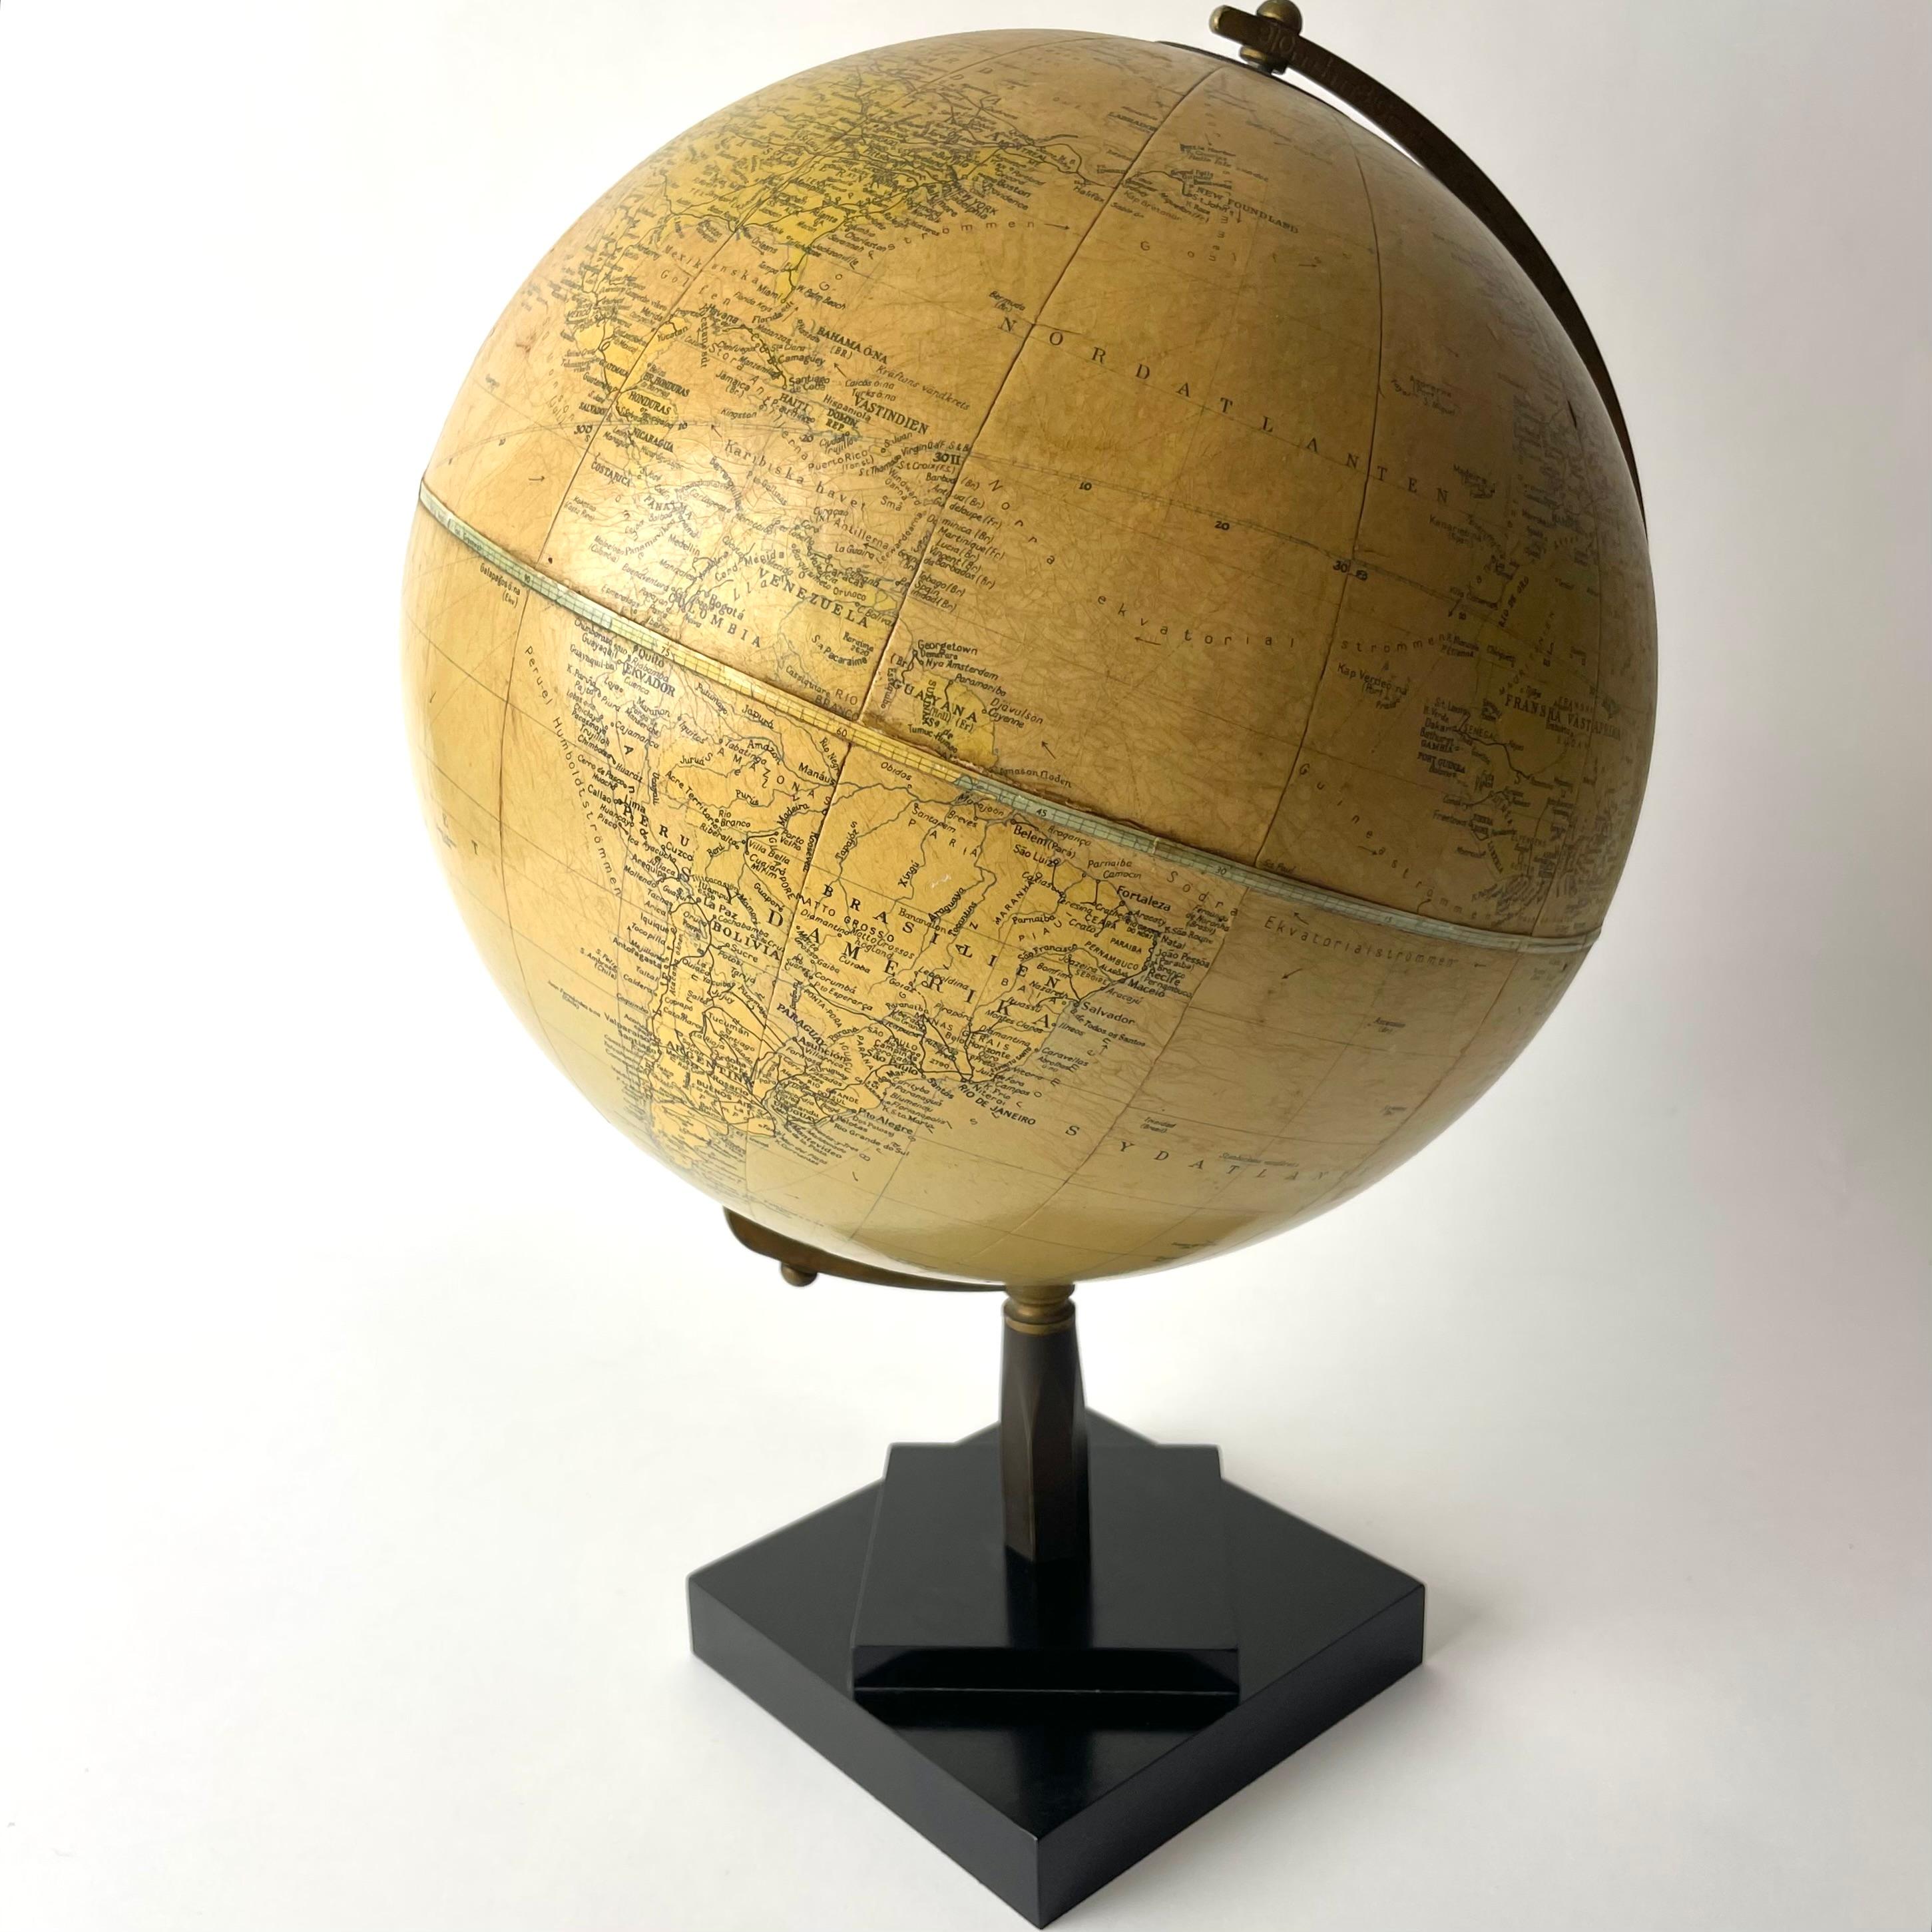 1930s Globe in Bakelite and Brass, manufactured by Philips for Swedish organisation Folket i Bild, famous for promoting popular education, civic democracy and engagement. Depicts the world before the Second World War. Country and place names in